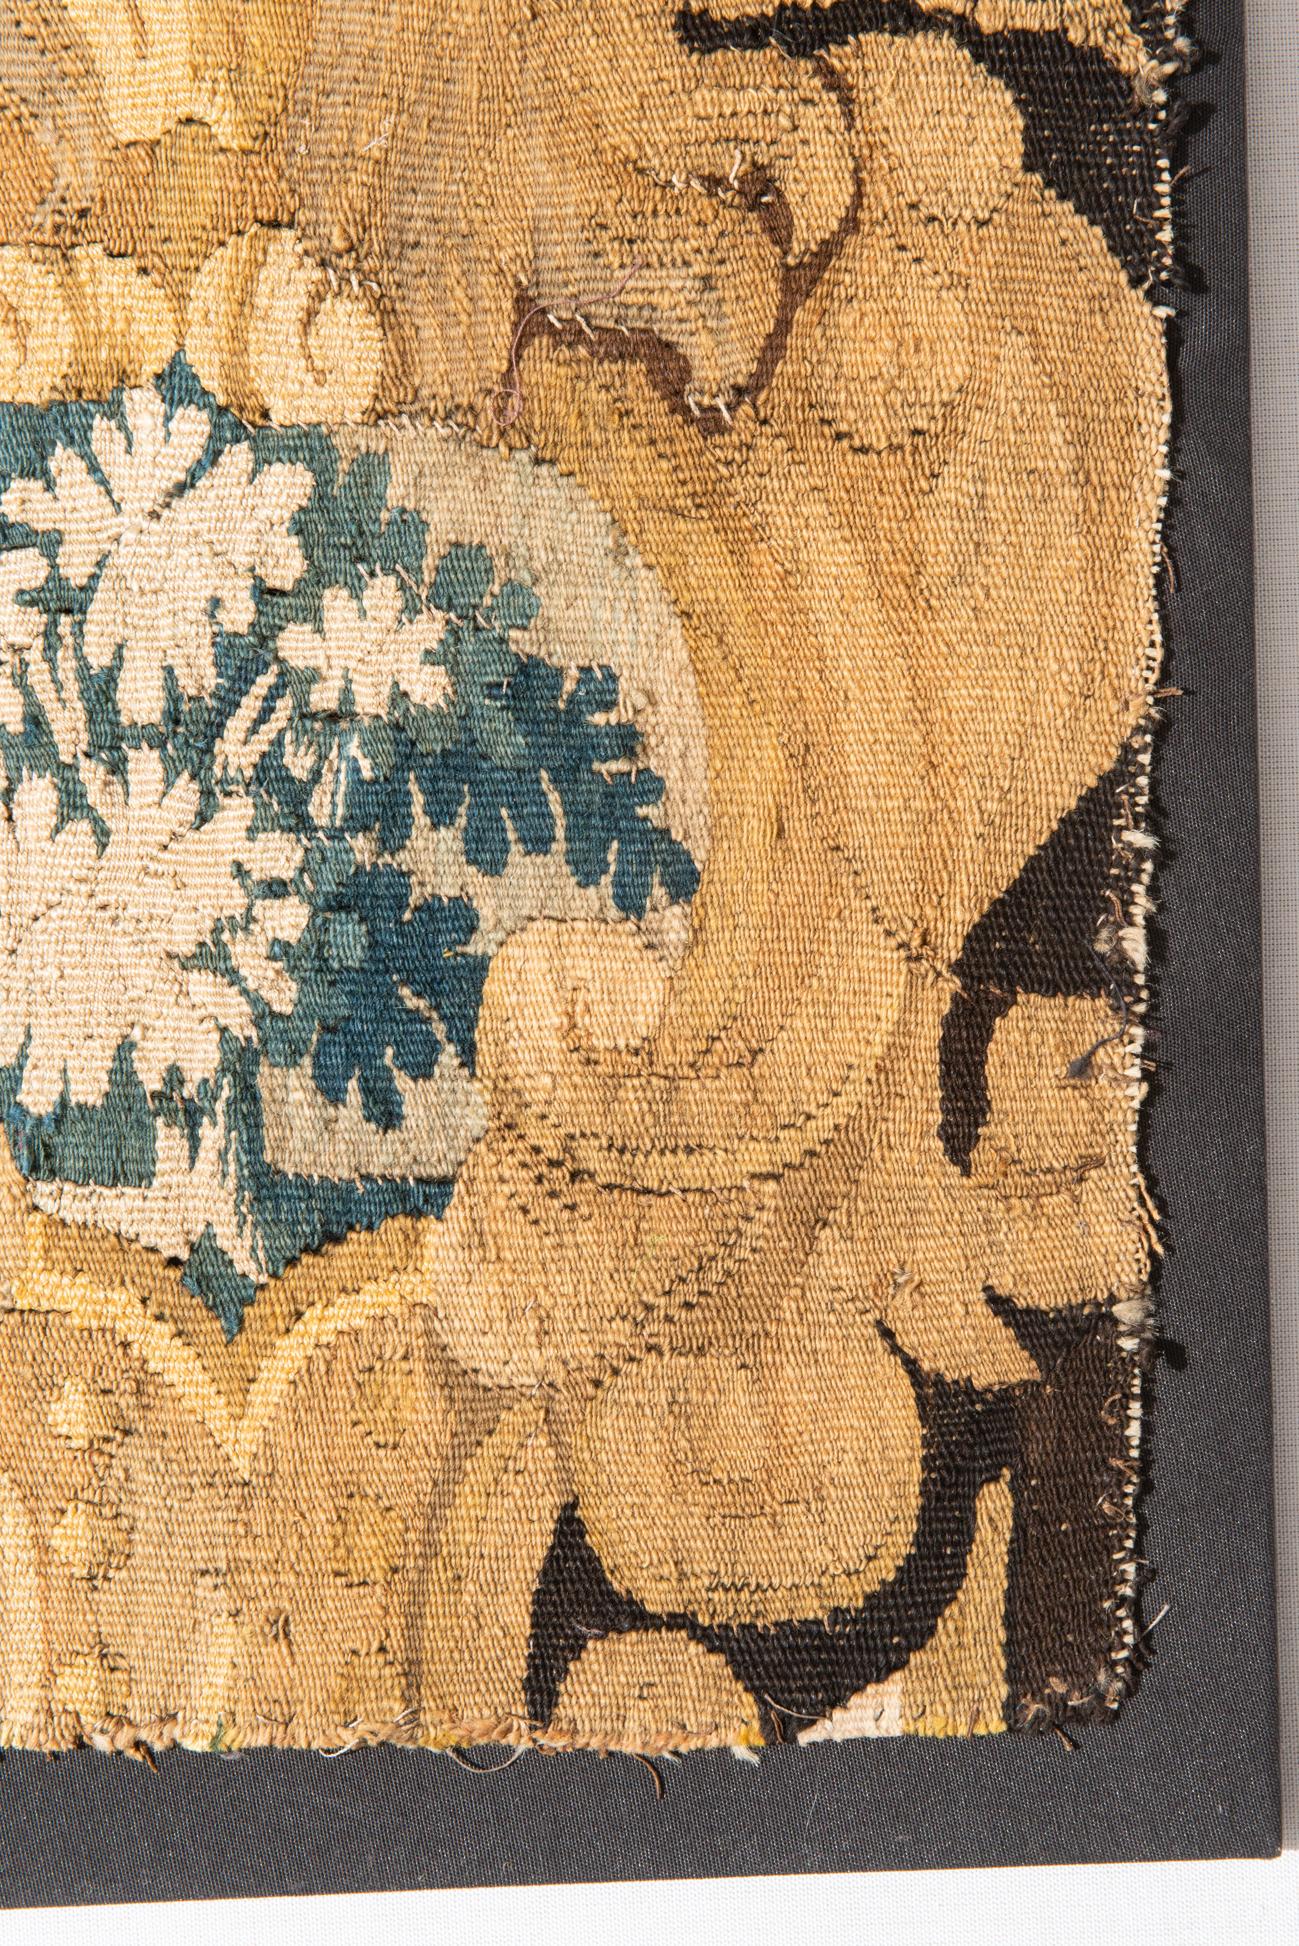 Aubusson Flemish Tapestry Fragment For Sale